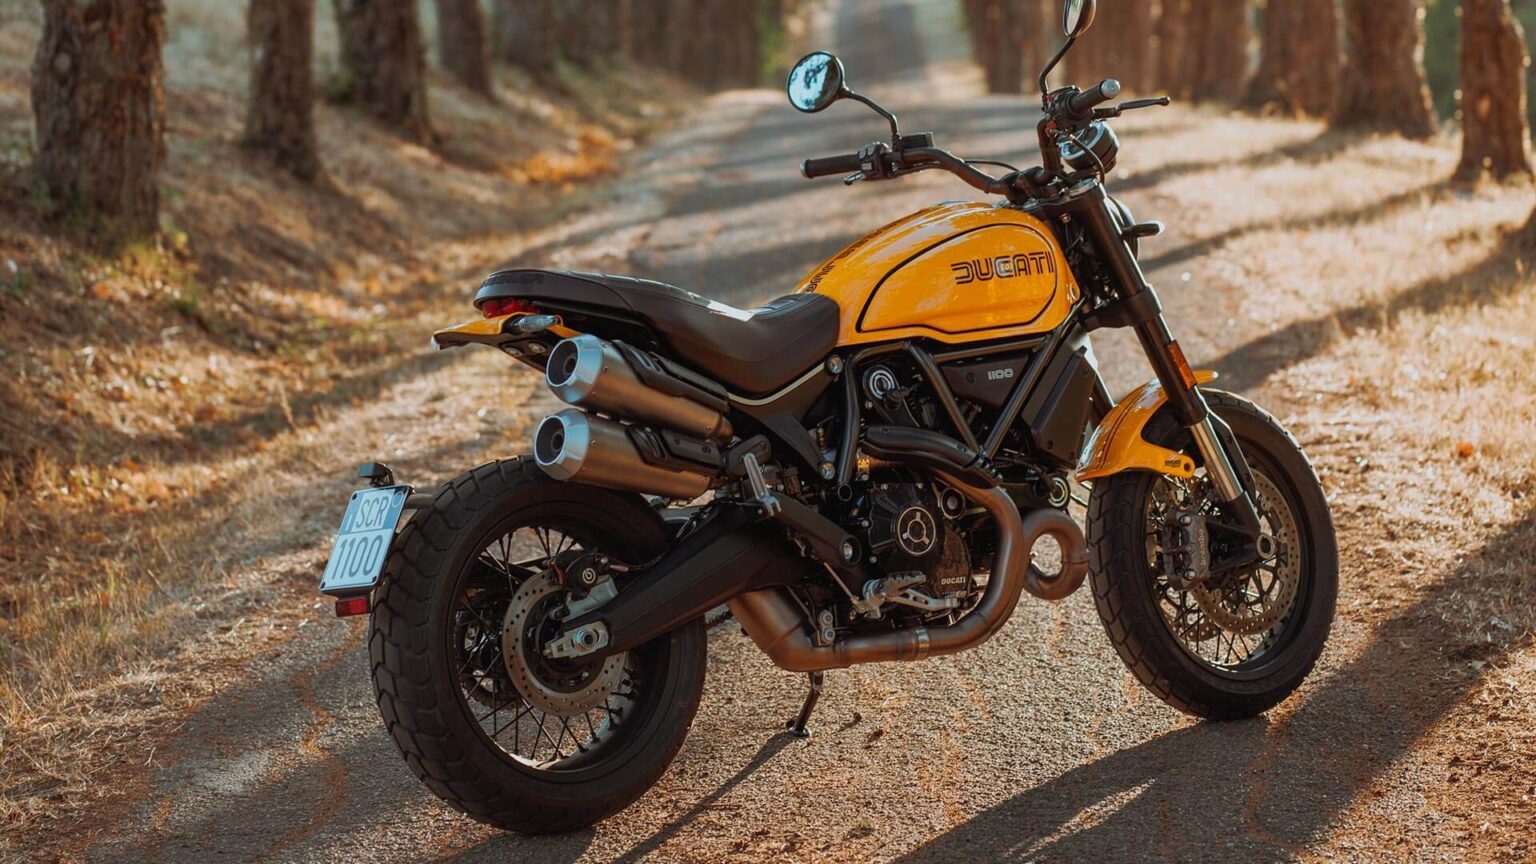 2022 Ducati 1100 Tribute Pro on dirt road in forest